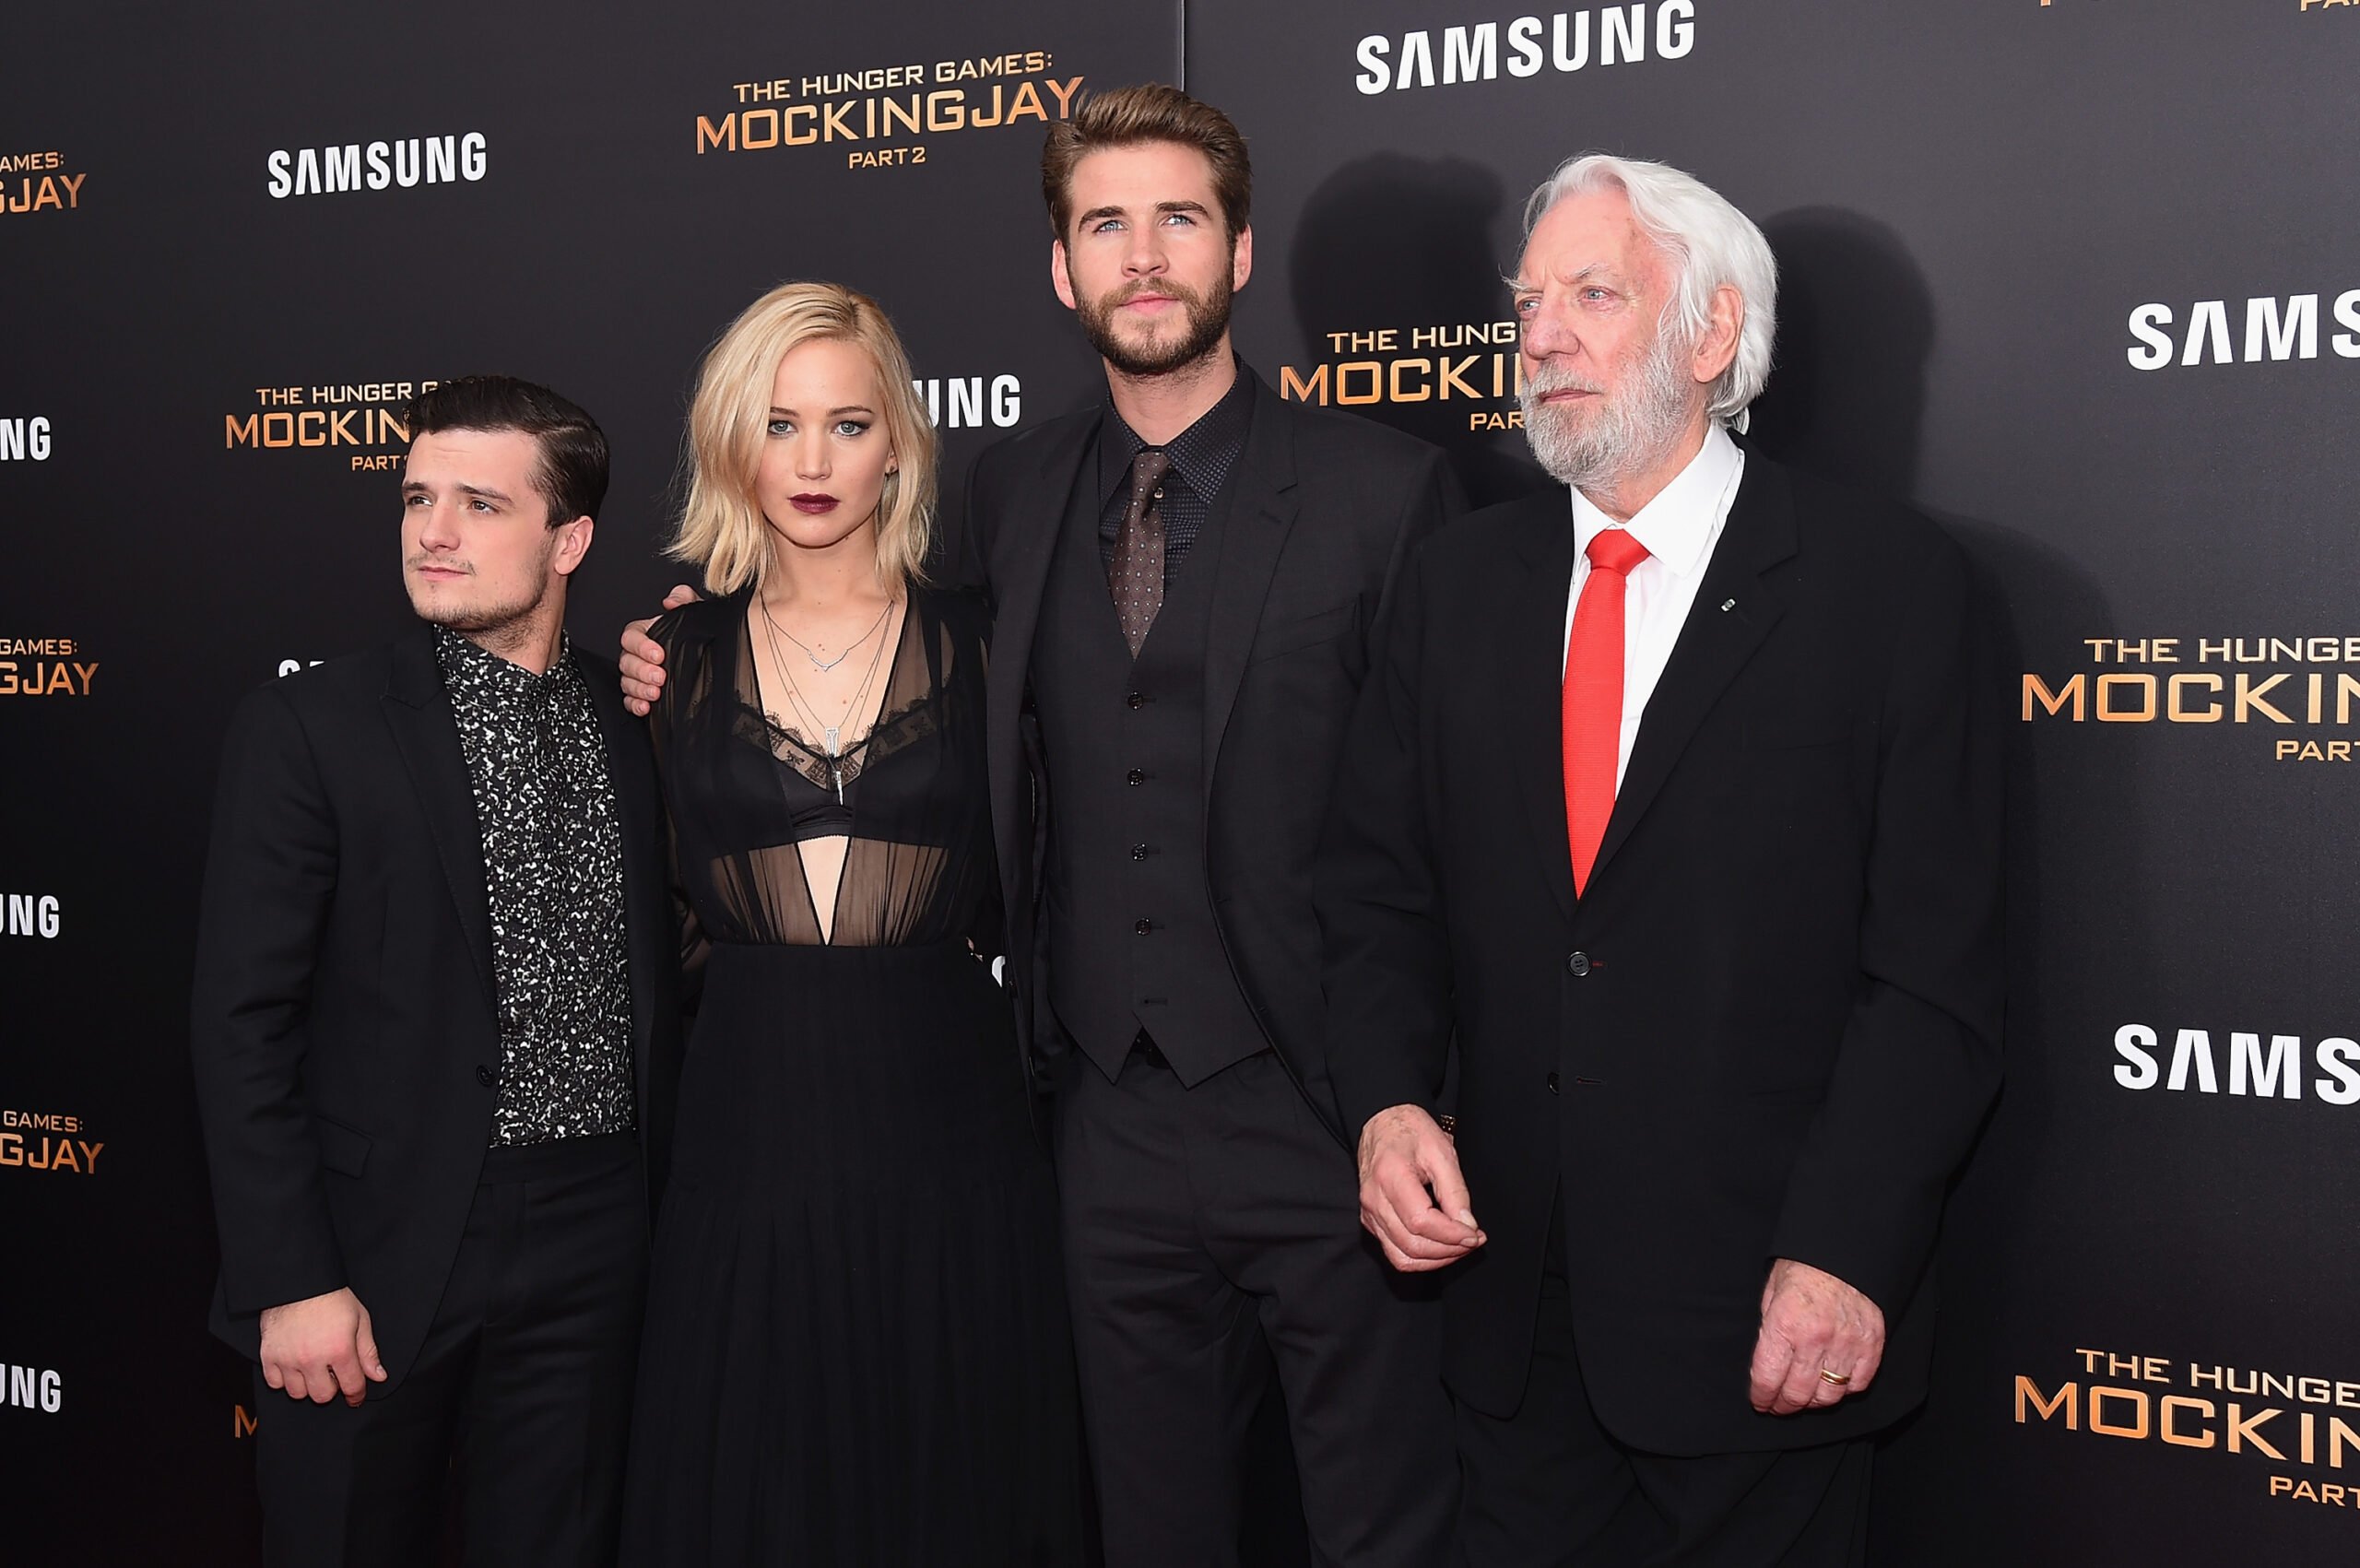 Cast members of 'The Hunger Games,' currently streaming on Netflix.